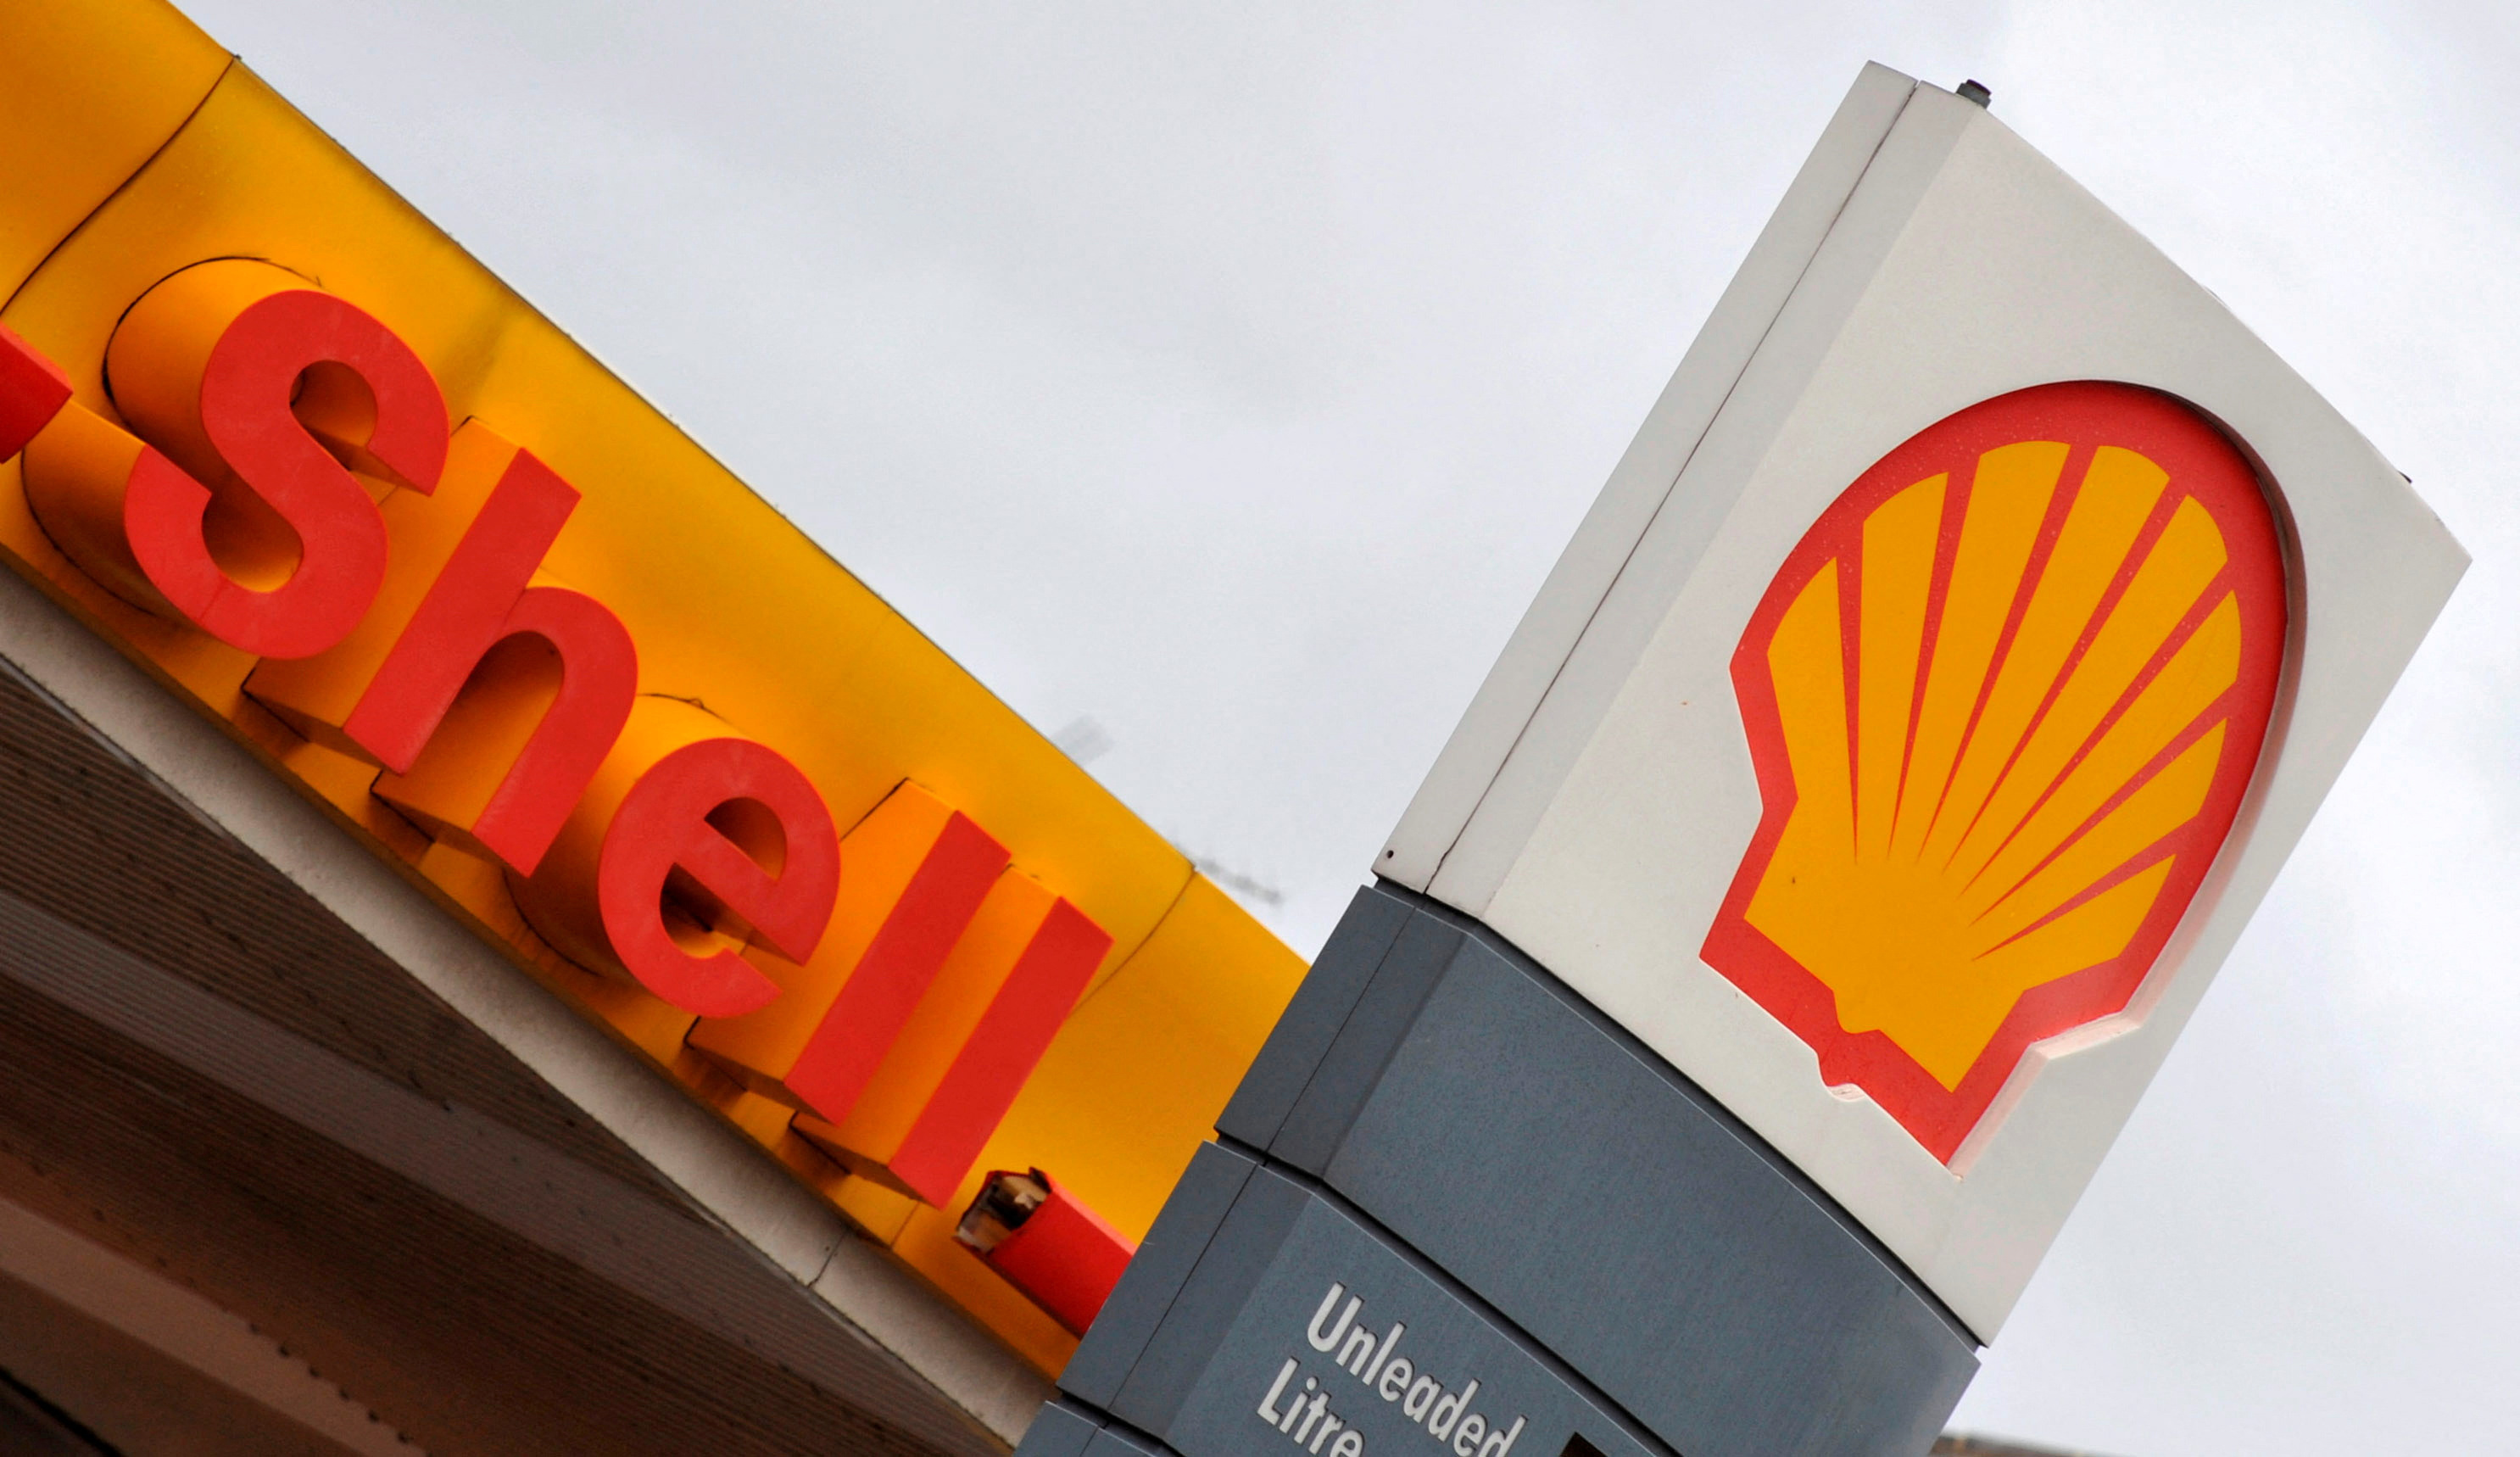 The Royal Dutch Shell logo is seen at a Shell petrol station in London, UK